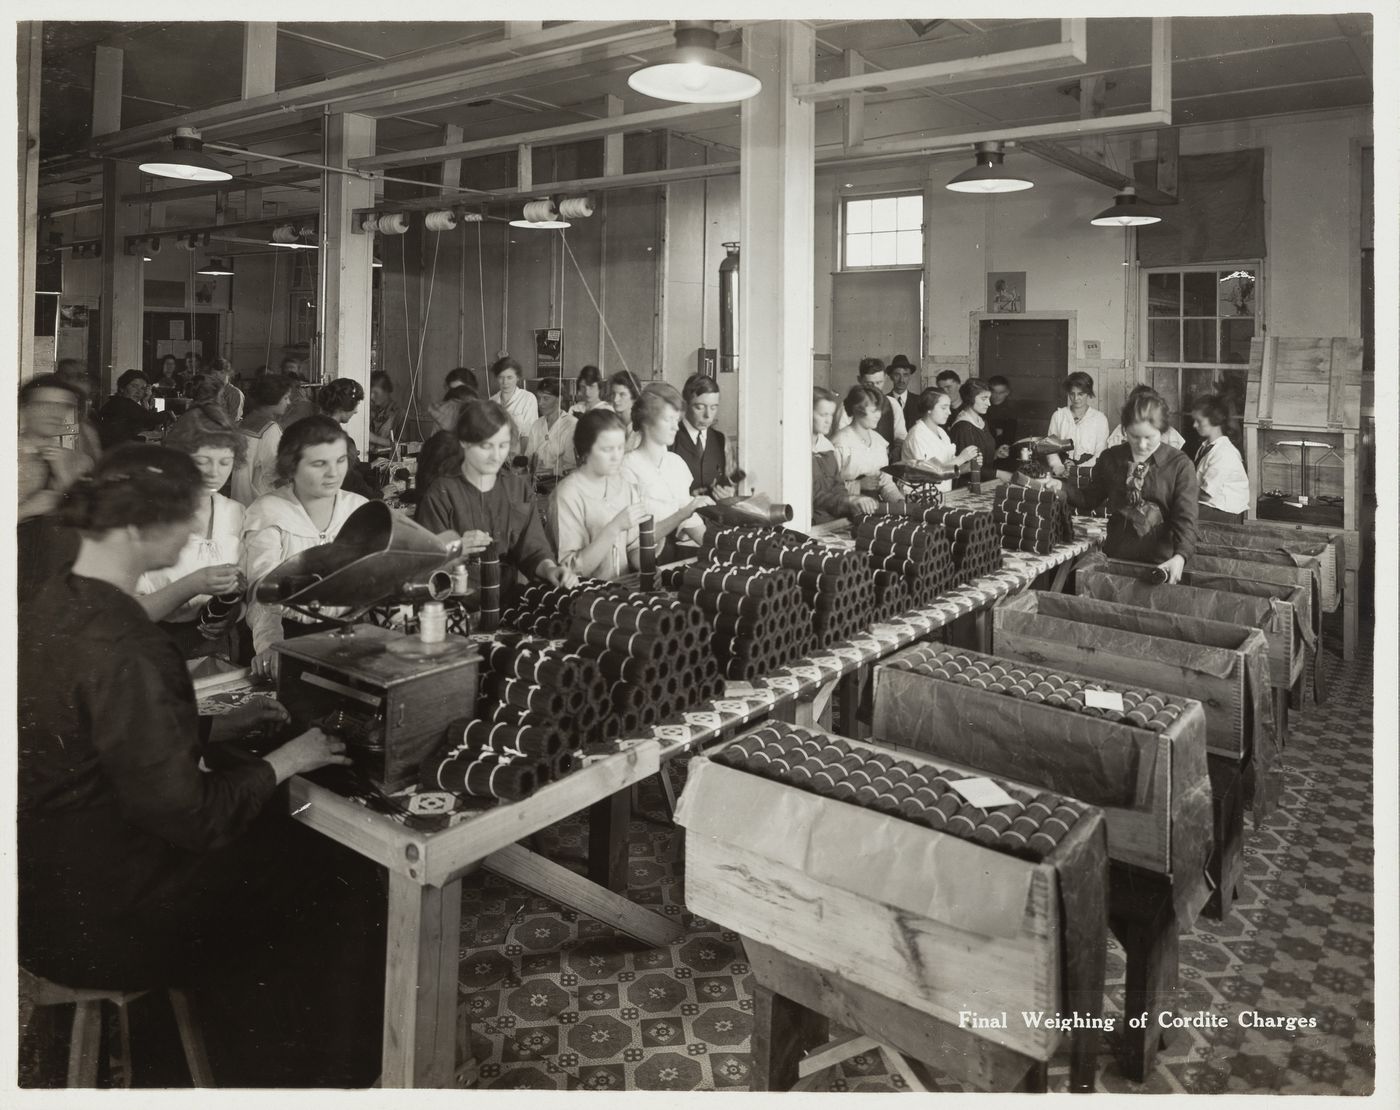 Interior view of workers doing the final weighing of cordite charges at the Energite Explosives Plant No. 3, the Shell Loading Plant, Renfrew, Ontario, Canada